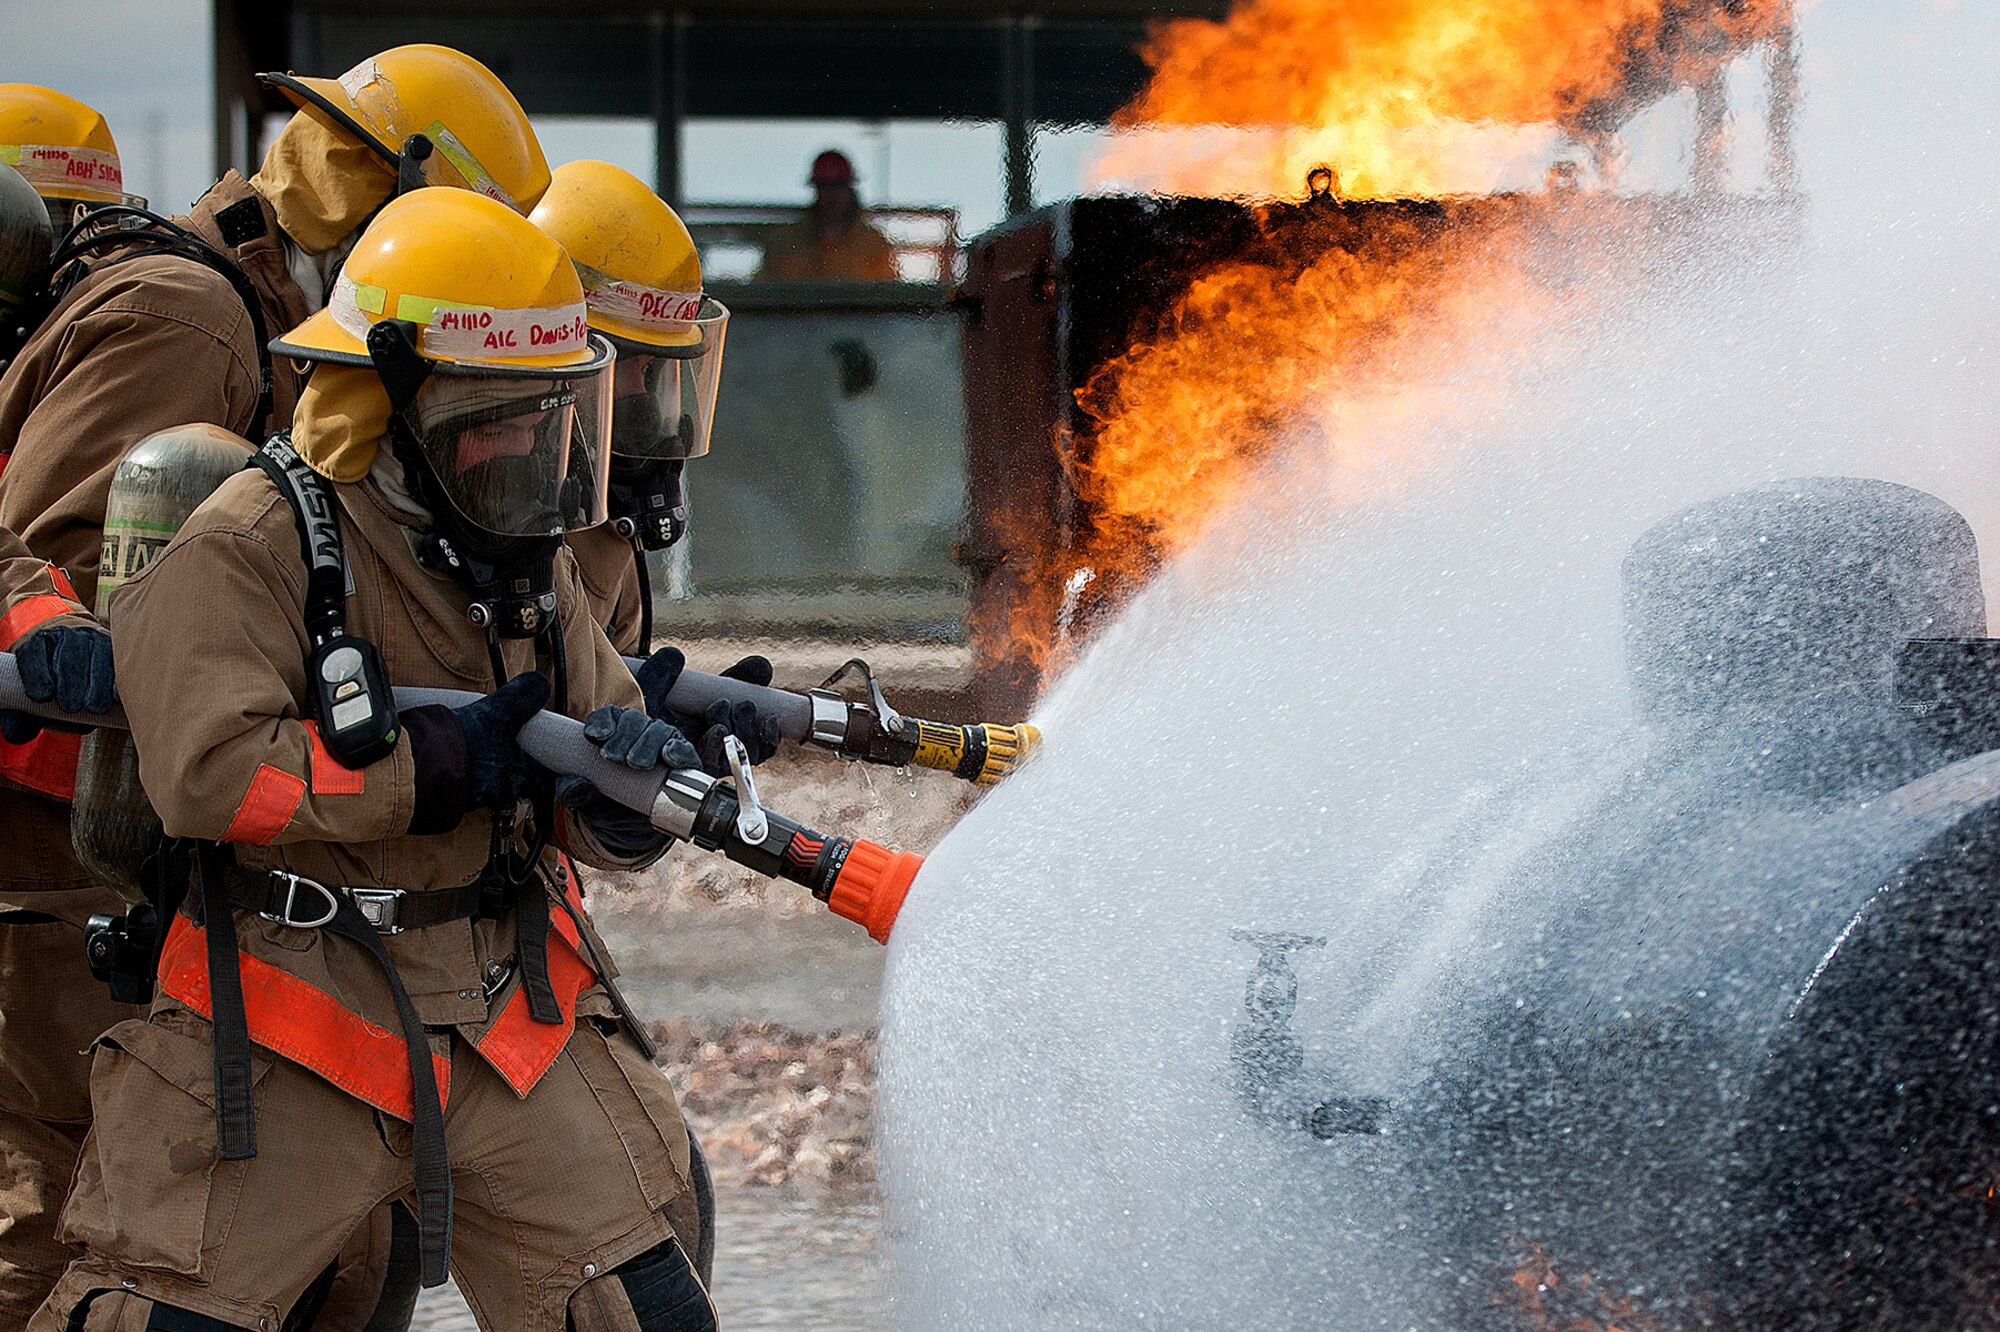 GOODFELLOW AIR FORCE BASE, Texas – 312th Training Squadron Students put out a fire during Block four training at the Louis F. Garland Department of Defense Fire Academy Feb. 3. Block four is the first training segment where students fight fires. (U.S. Air Force photo/ Airman 1st Class Devin Boyer)